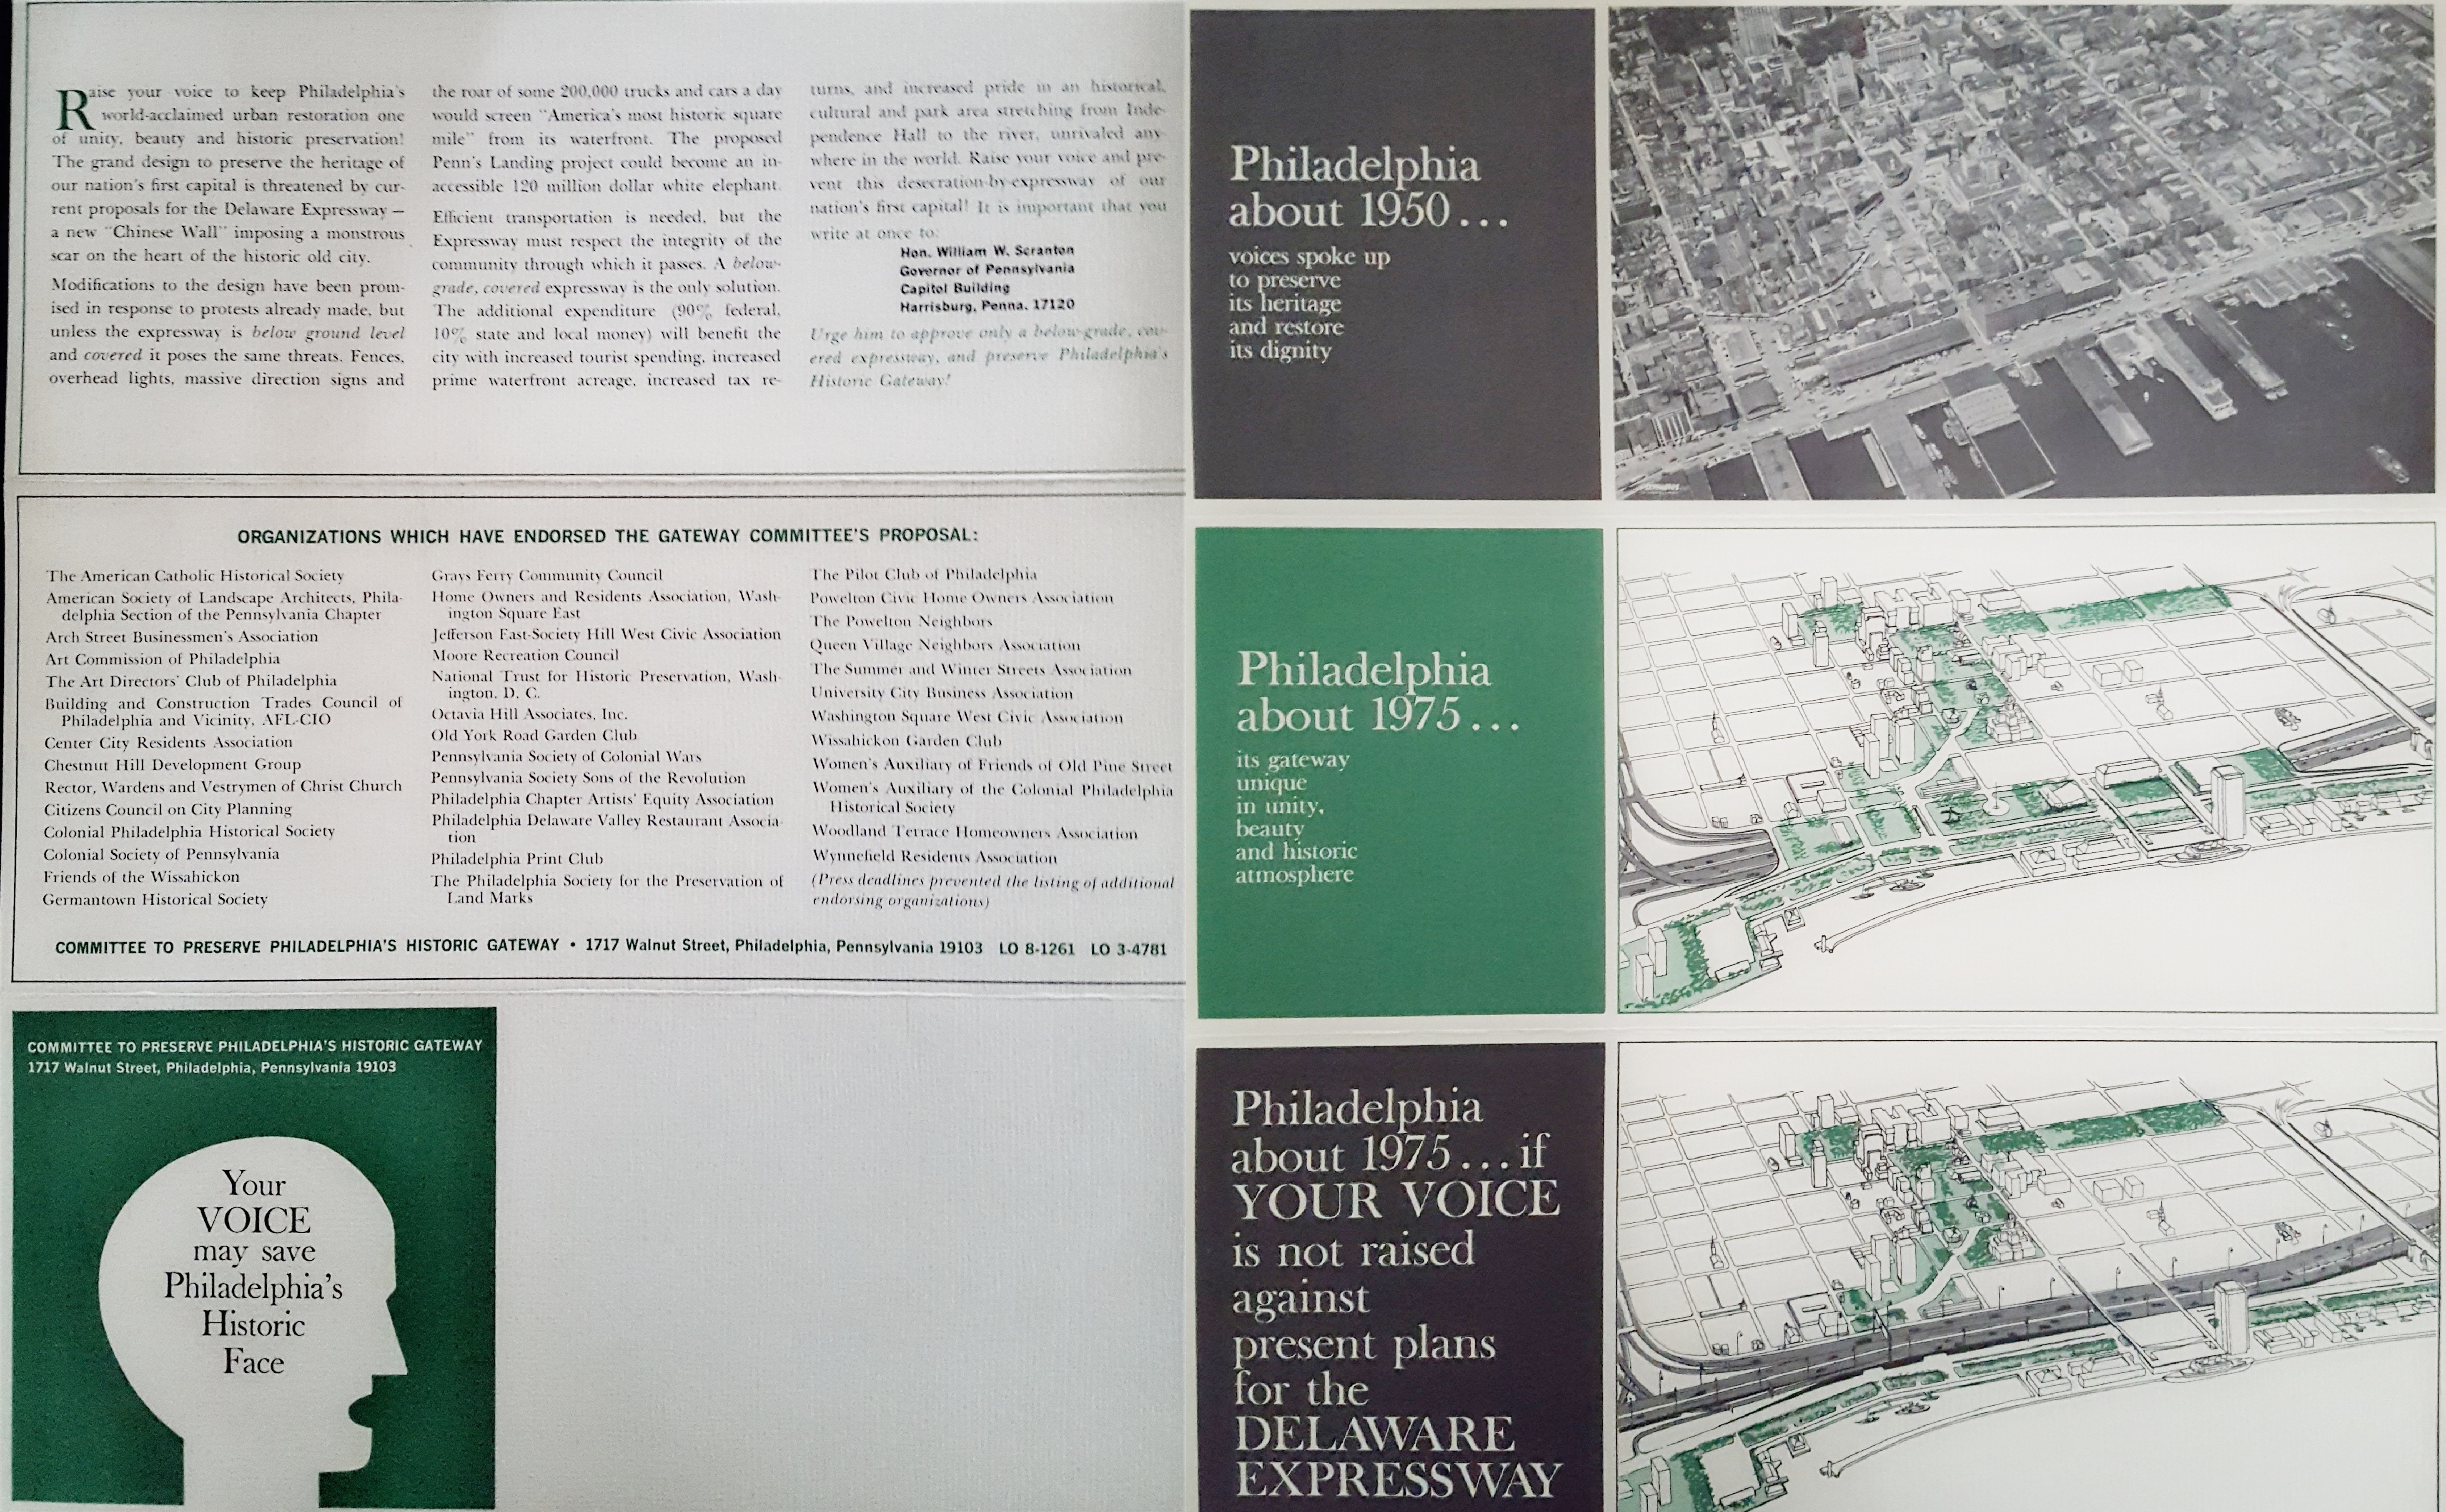 First Gateway Committee brochure showing (on the left) the case statement and supporting organizations and (on the right) the waterfront before redevelopment, the Architects Committee vision, and the State Highway Dept. vision.